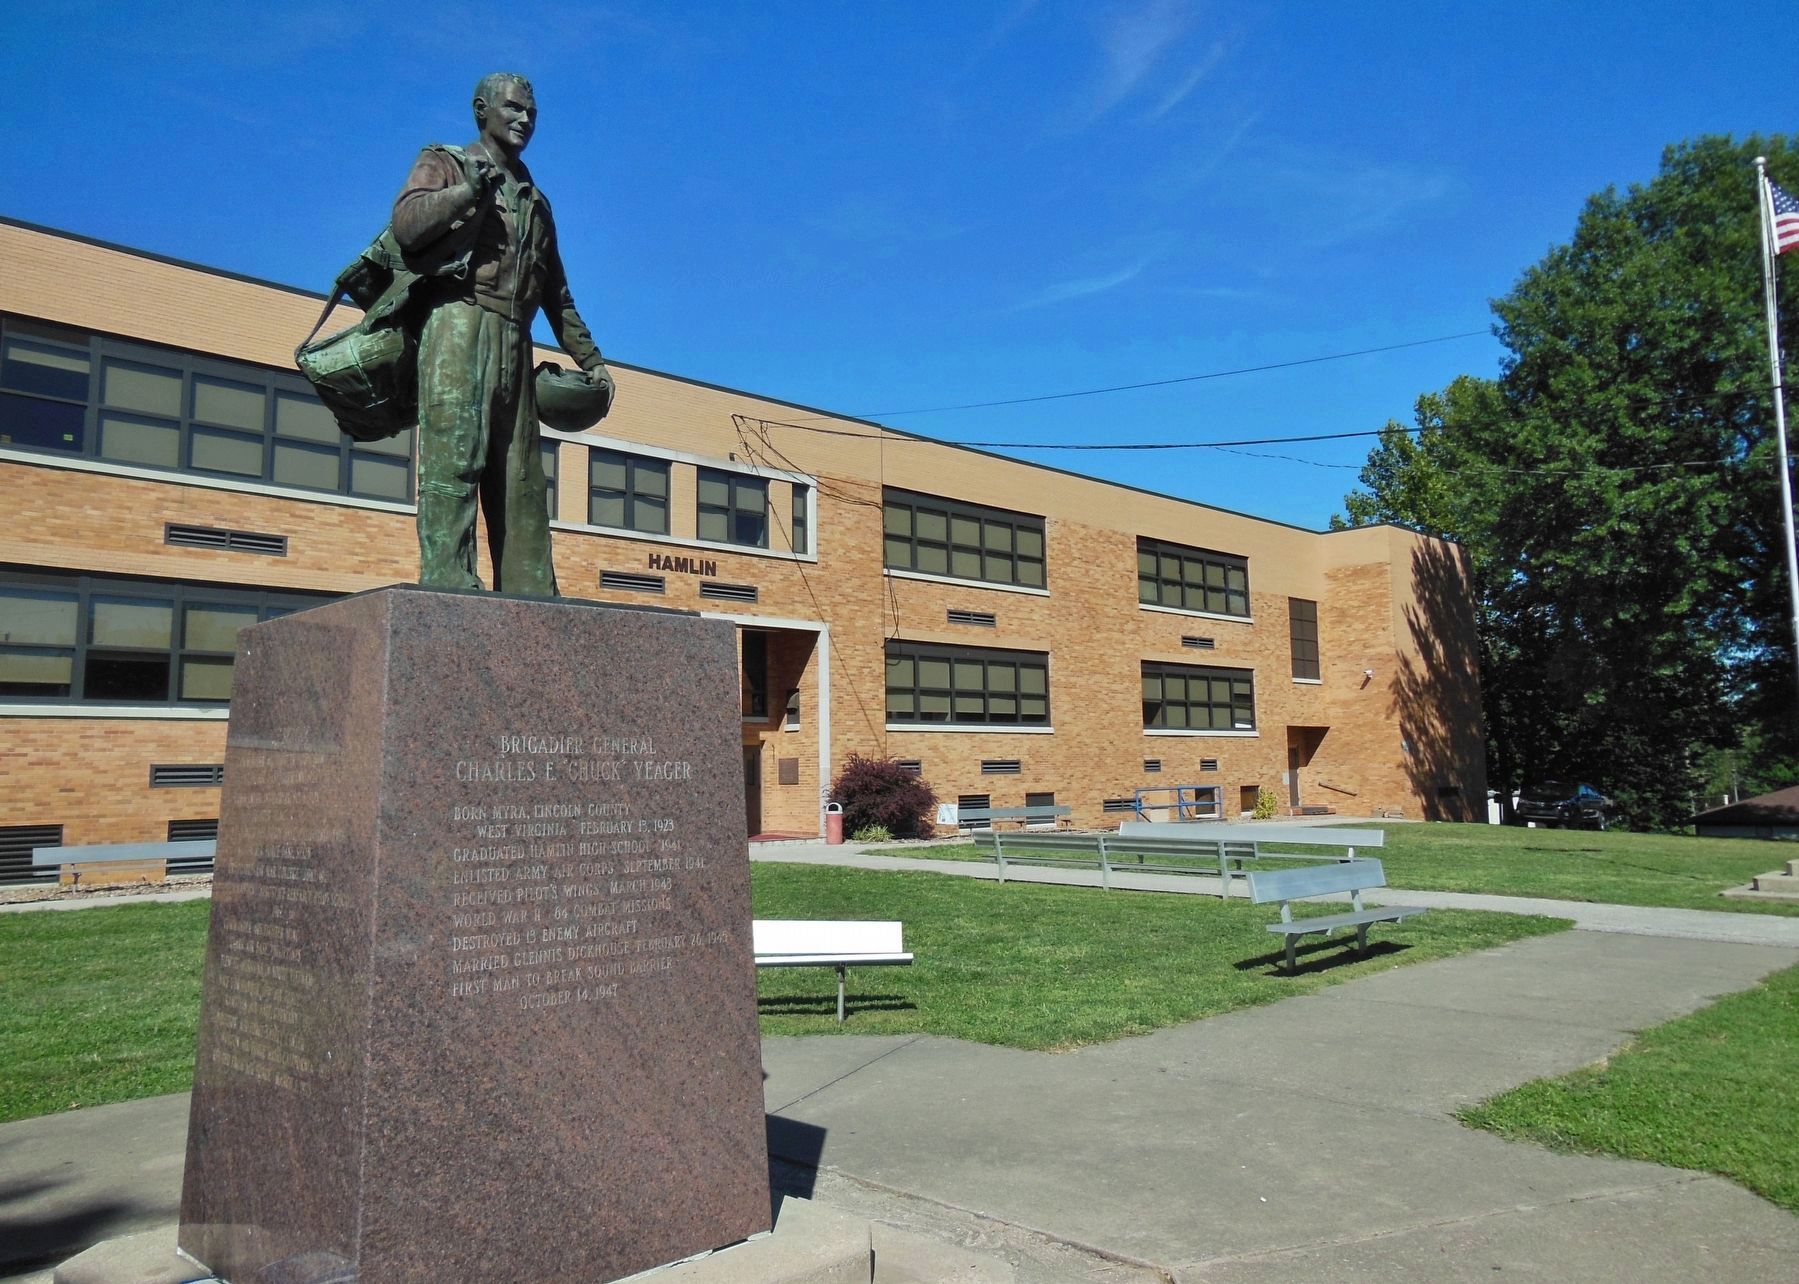 Brigadier General Charles E. "Chuck" Yeager Monument (<i>wide view; Hamlin Grade School behind</i>) image. Click for full size.